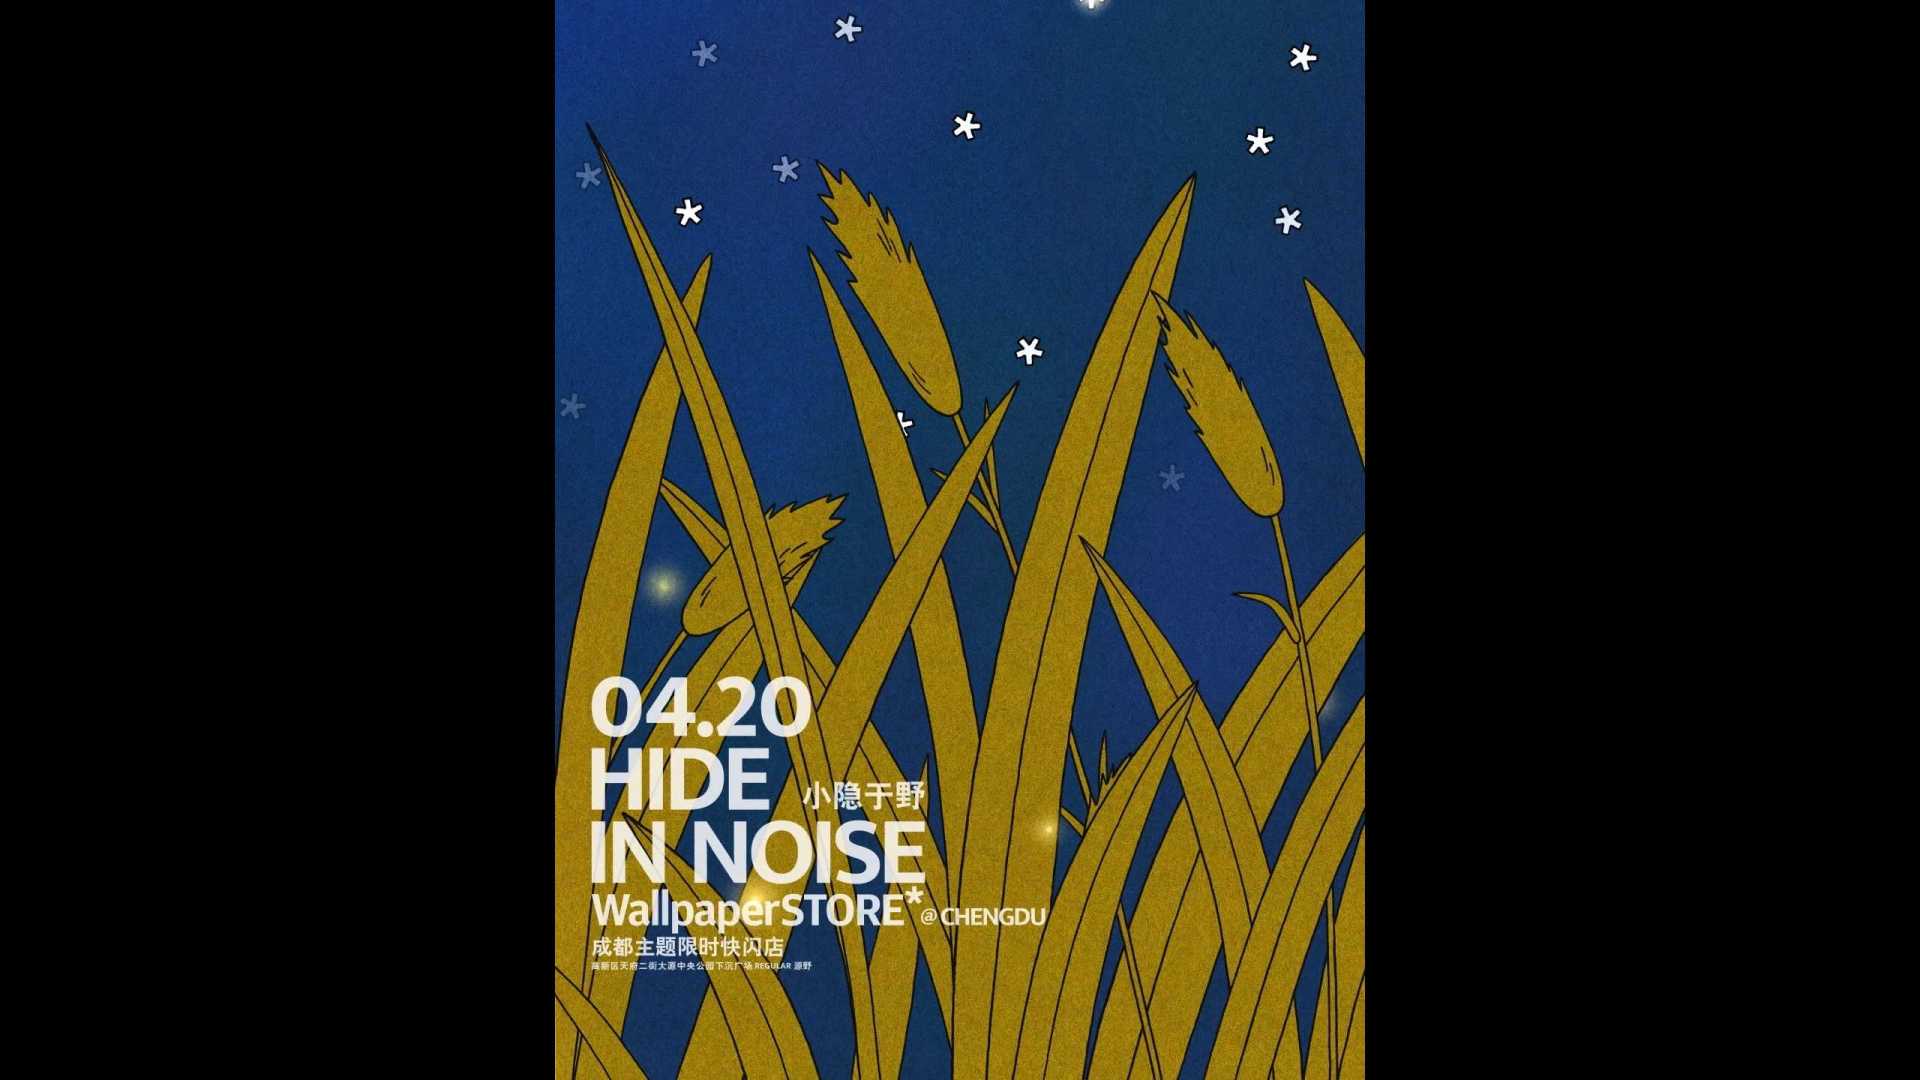 WallpaperSTORE*成都主题限时快闪店——HIDE IN NOISE